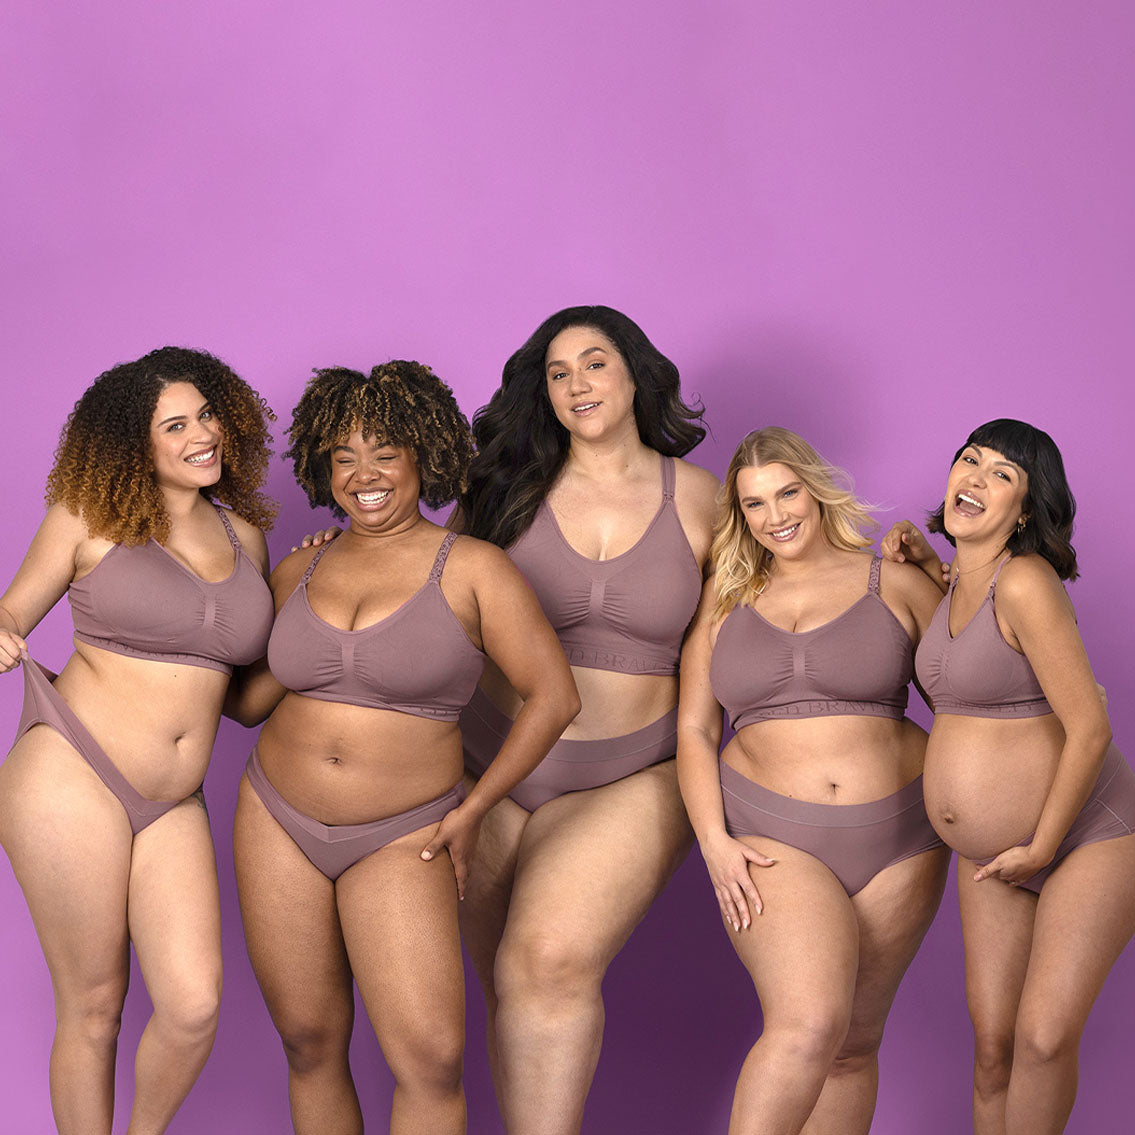 Plus Size Bras: The Top 3 Things You Need for the Perfect Fit - Bra Space